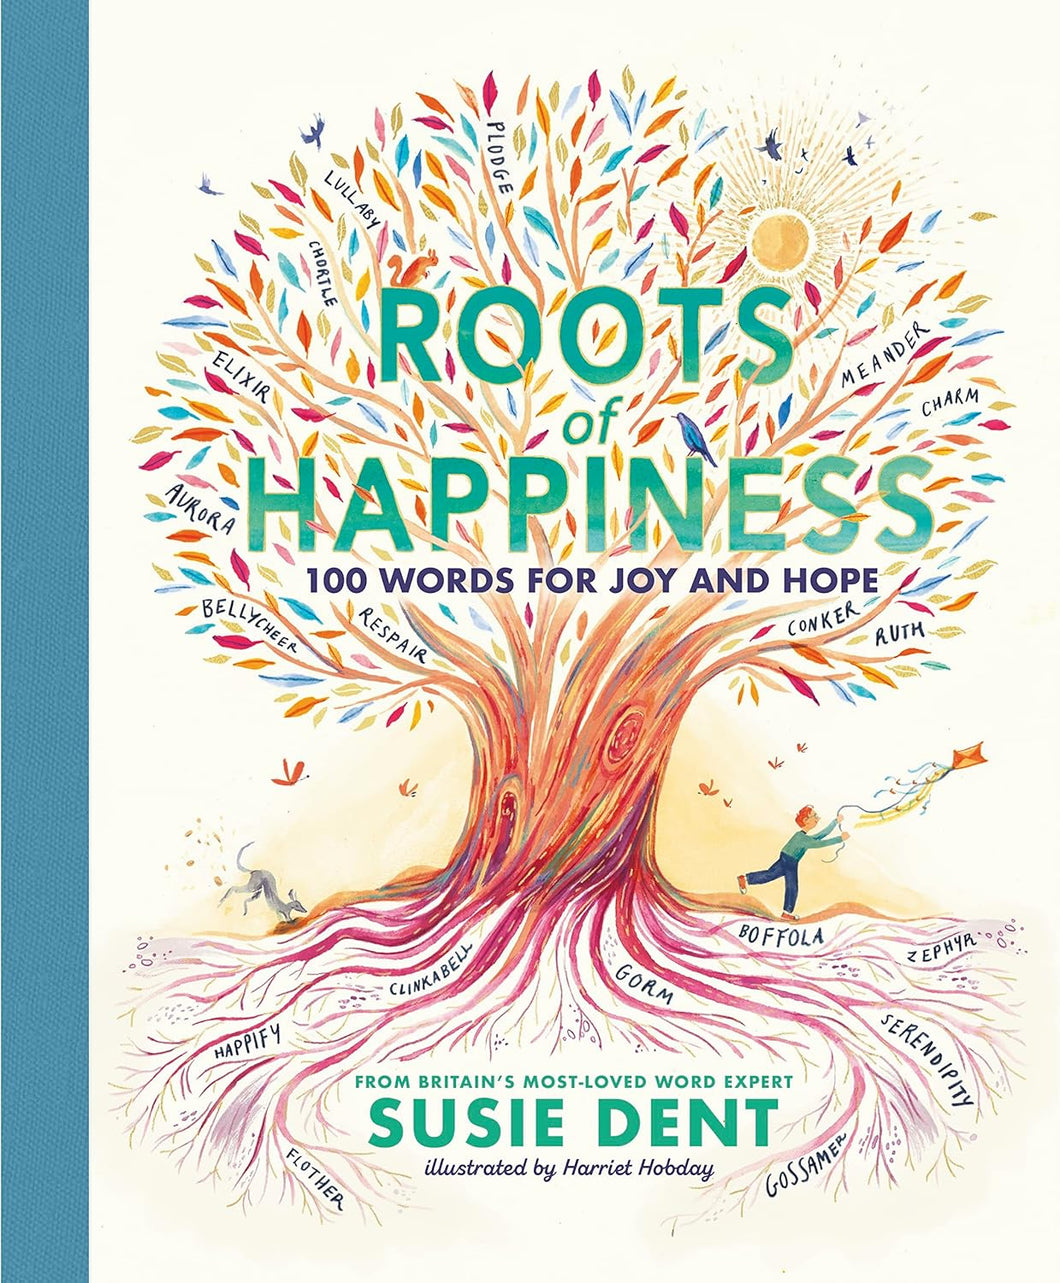 Roots of Happiness: 100 Words for Joy and Hope from Britain's Most-Loved Word Expert by Susie Dent